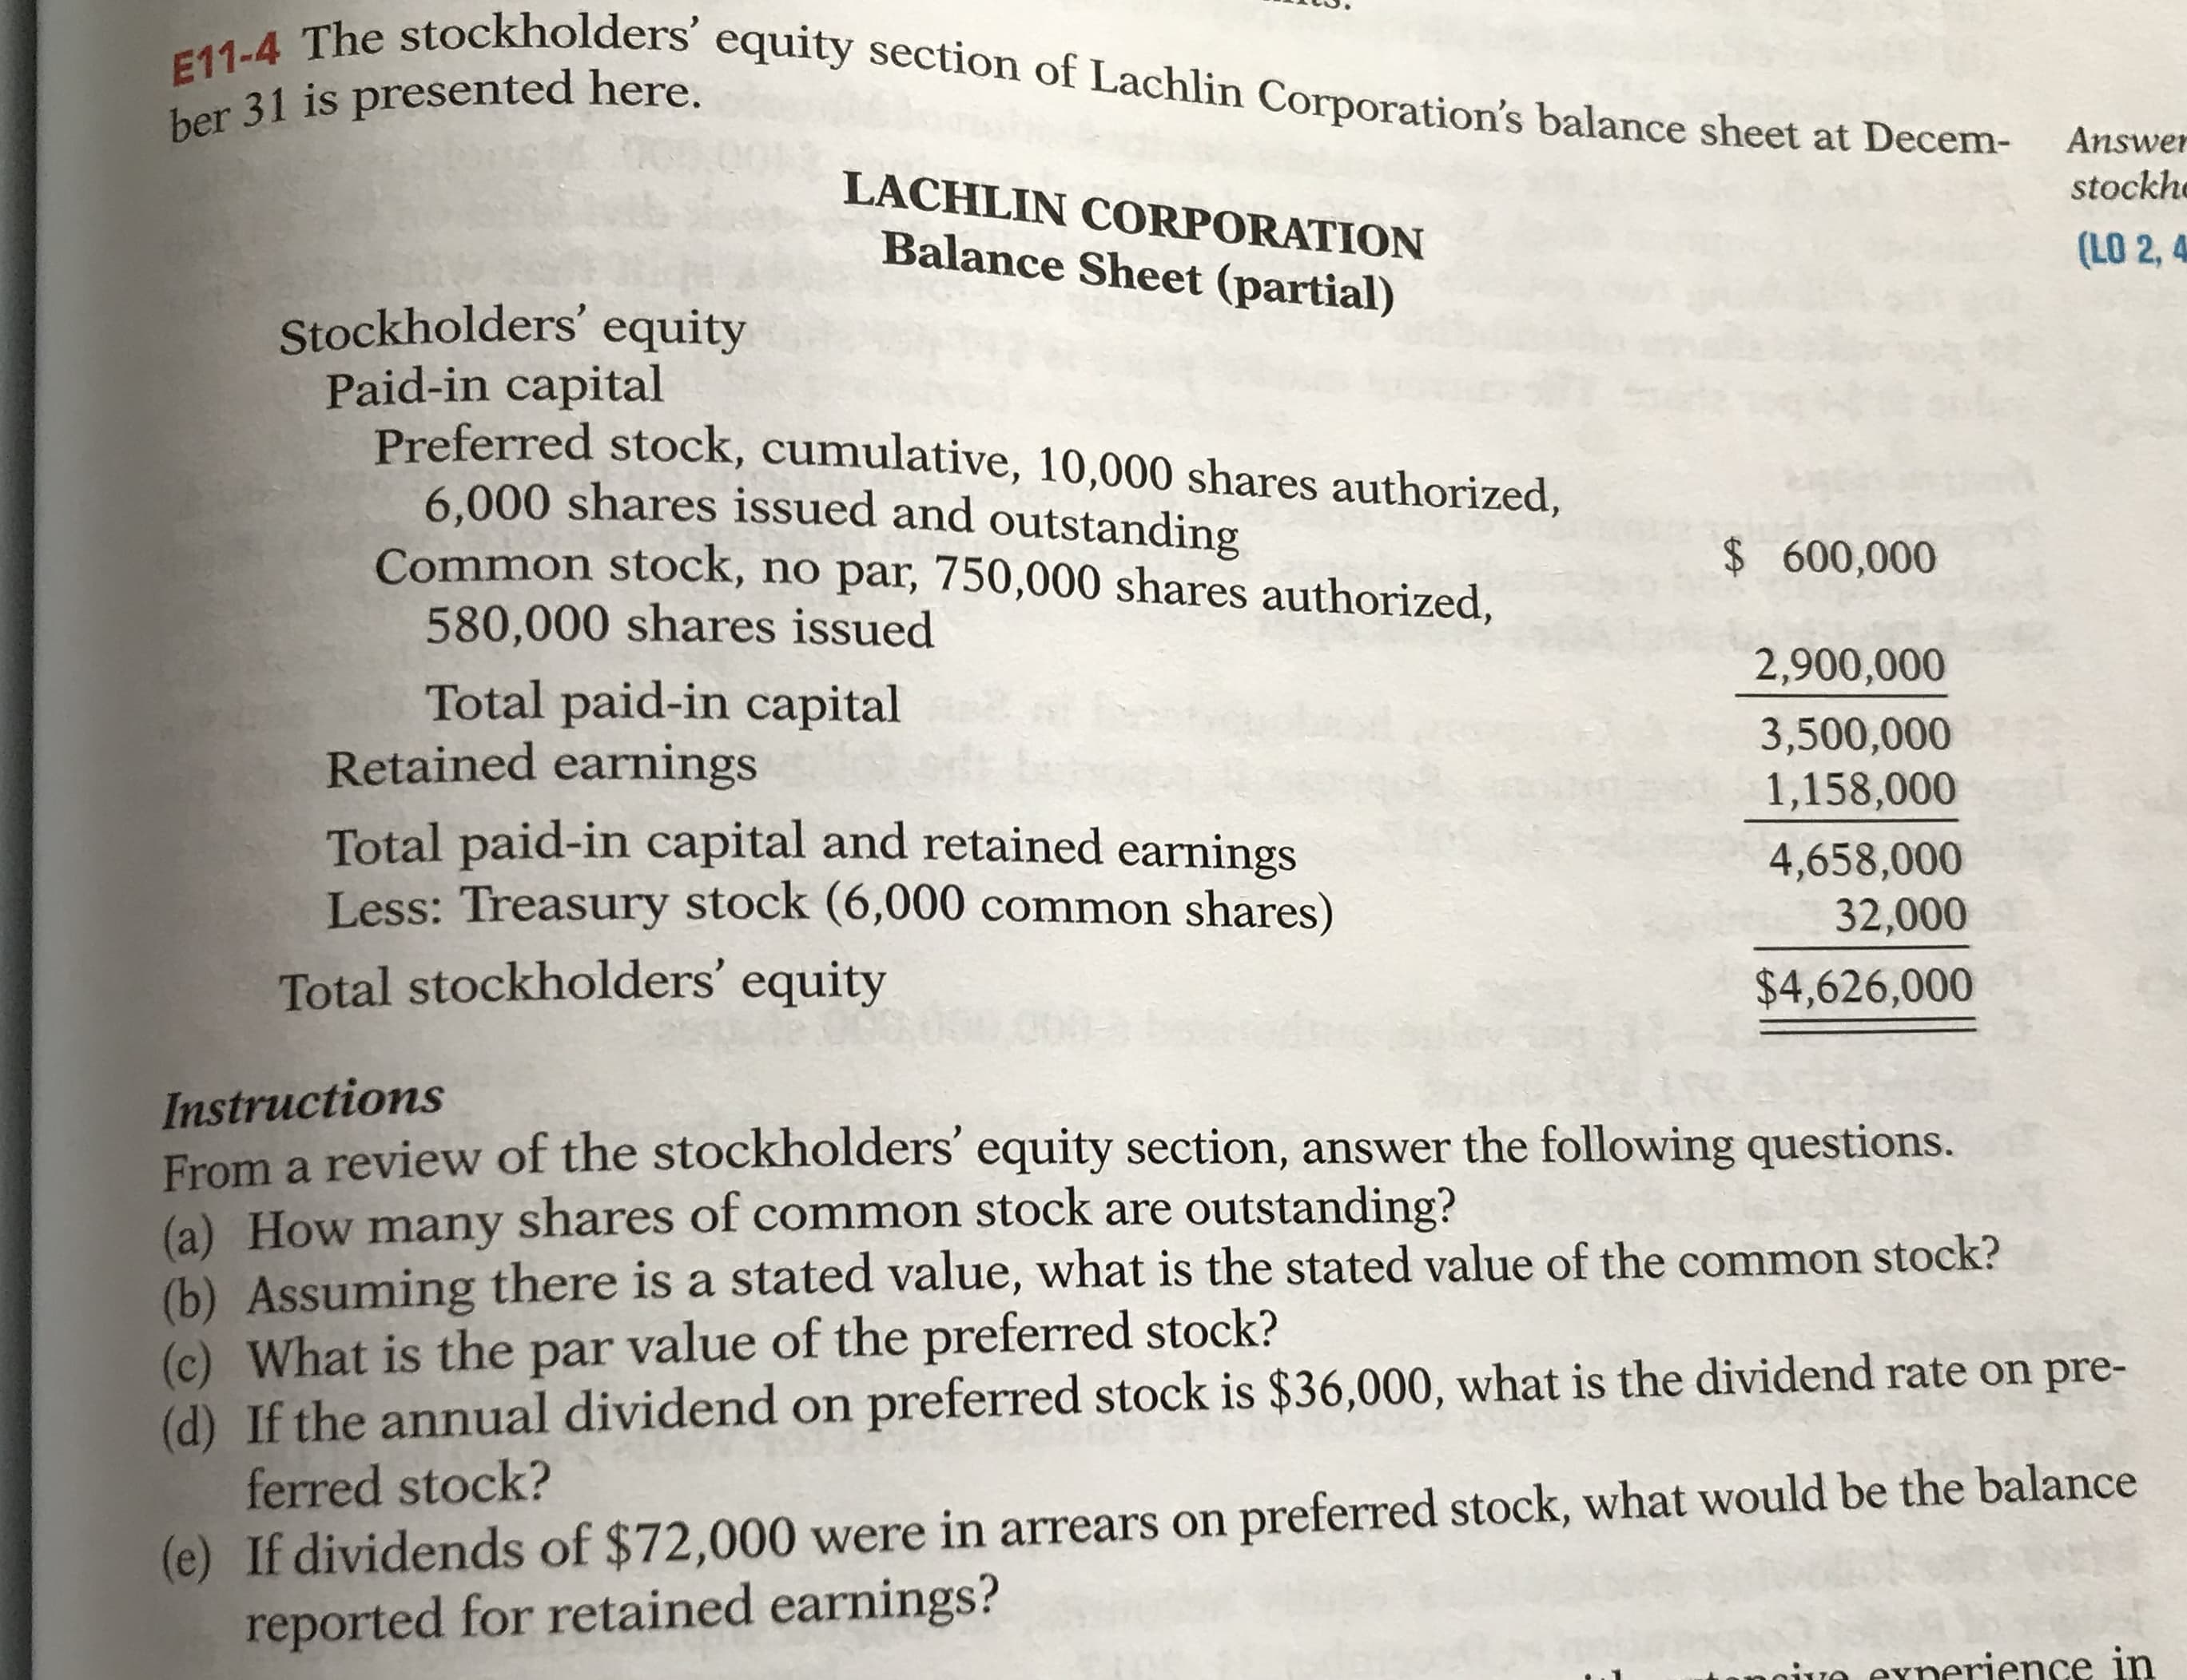 E11-4 The stockholders' equity section of Lachlin Corporation's balance sheet at Decem-
ber 31 is presented here.
Answer
LACHLIN CORPORATION
stockhe
Balance Sheet (partial)
(LO 2, 4
Stockholders' equity
Paid-in capital
Preferred stock, cumulative, 10,000 shares authorized,
6.000 shares issued and outstanding
Common stock, no par, 750,000 shares authorized,
$600,000
580,000 shares issued
2,900,000
Total paid-in capital
Retained earnings
3,500,000
1,158,000
Total paid-in capital and retained earnings
Less: Treasury stock (6,000 common shares)
4,658,000
32,000
Total stockholders' equity
$4,626,000
Instructions
From a review of the stockholders' equity section, answer the following questions.
(a) How many shares of common stock are outstanding?
(b) Assuming there is a stated value, what is the stated value of the common stock?
(c) What is the par value of the preferred stock?
(d) If the annual dividend on preferred stock is $36,000, what is the dividend rate on pre-
ferred stock?
(e) If dividends of $72,000 were in arrears on preferred stock, what would be the balance
reported for retained earnings?
noive exnerience in
